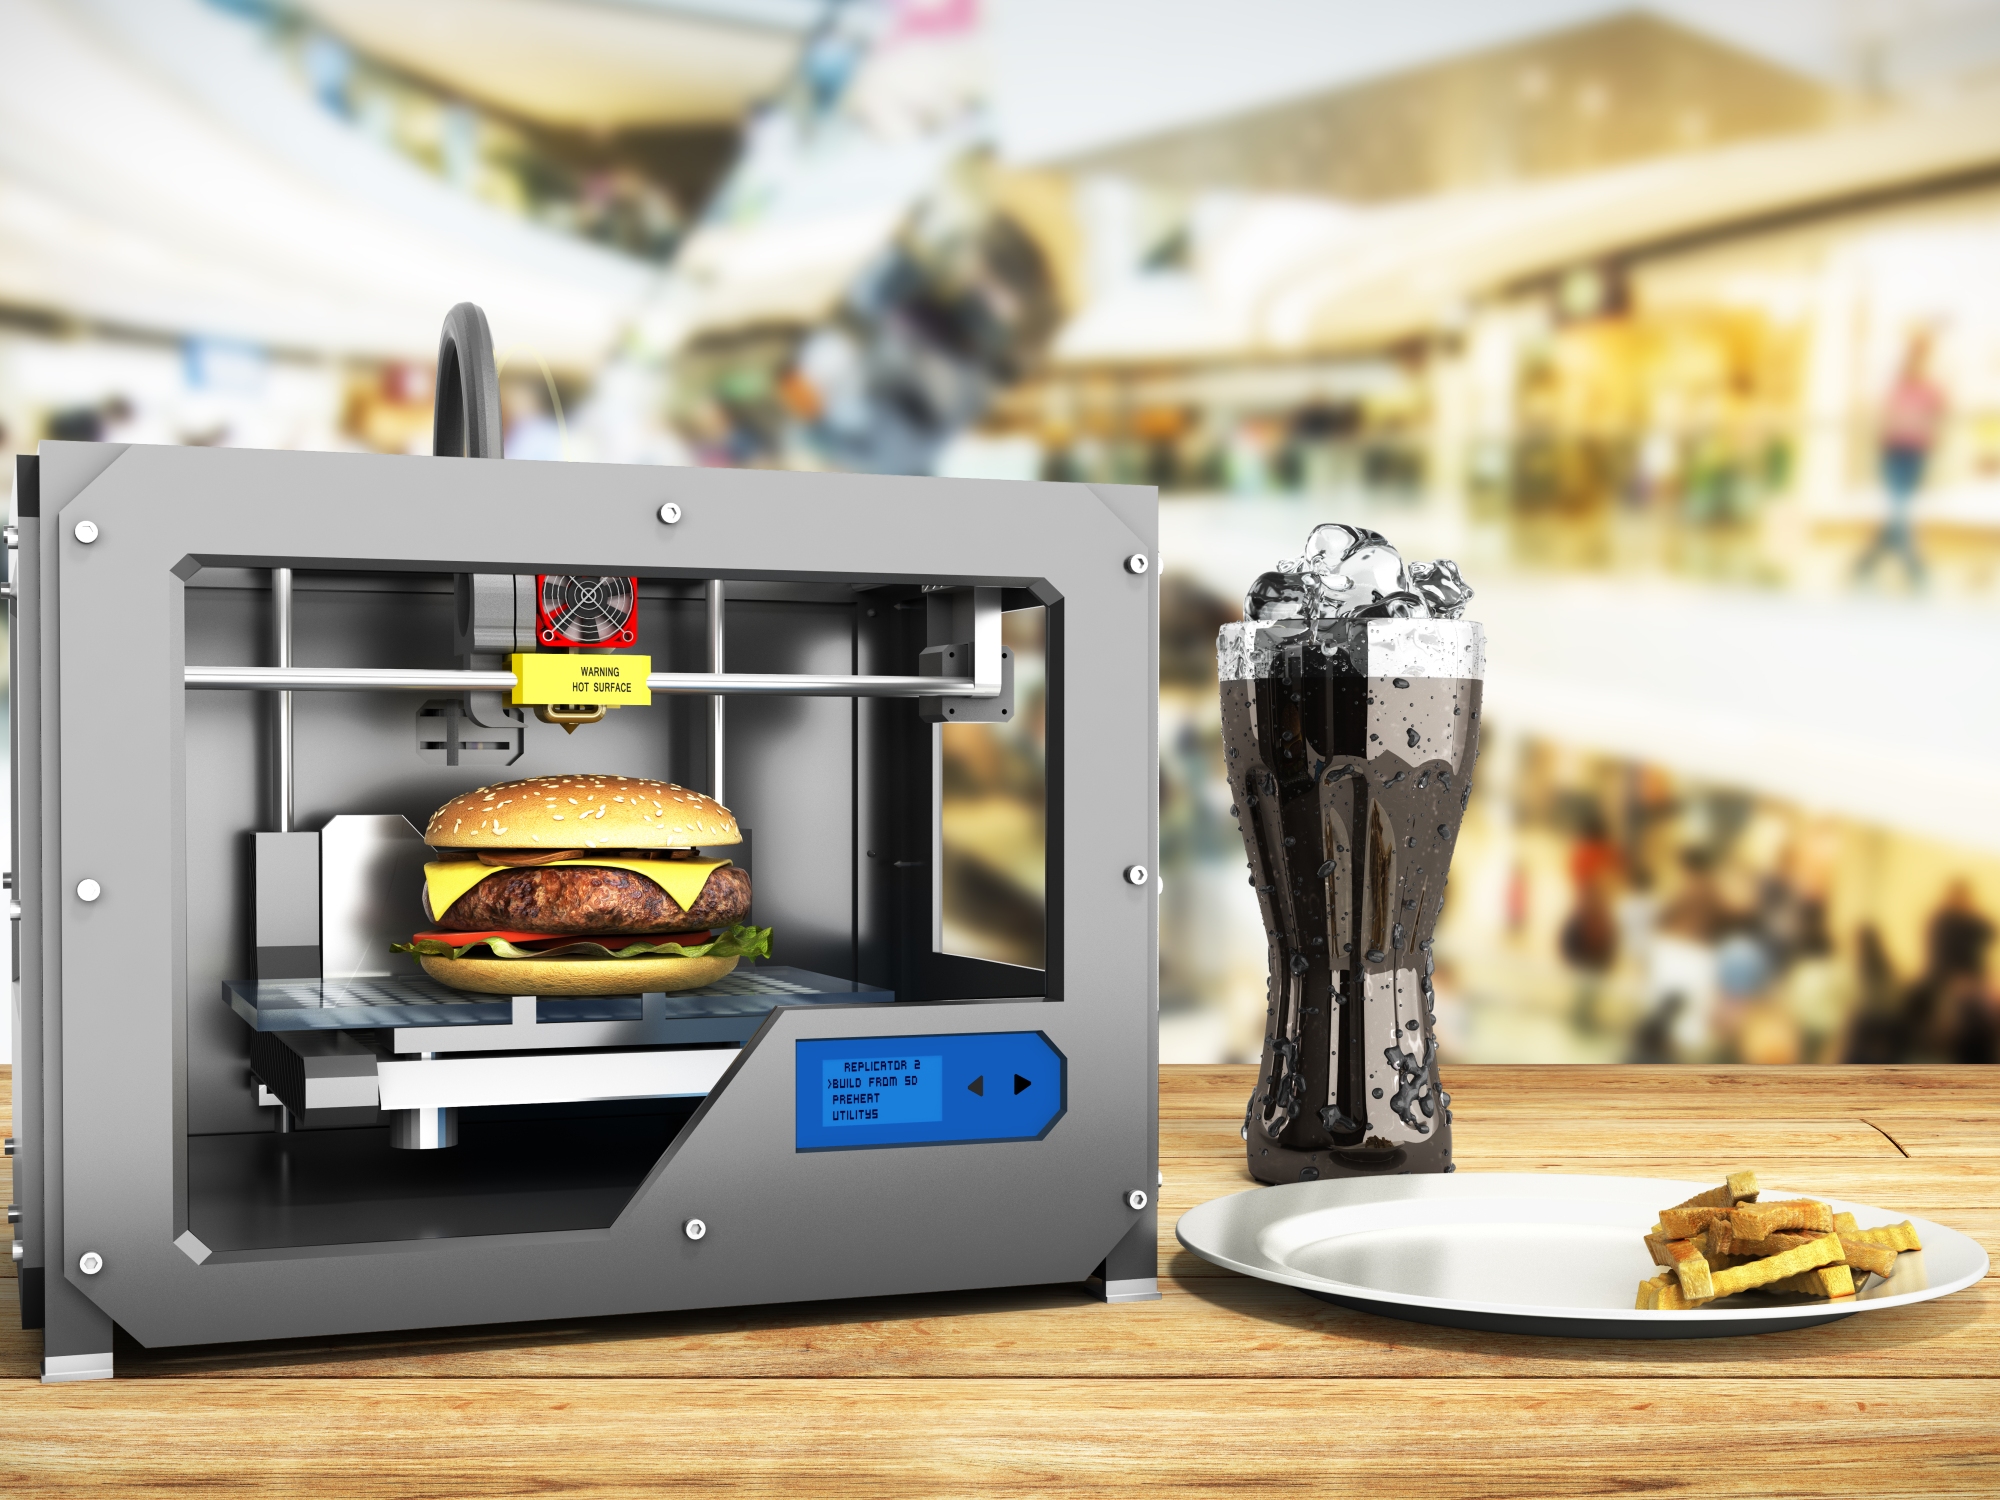 Burger being 3D printed in a shopping mall